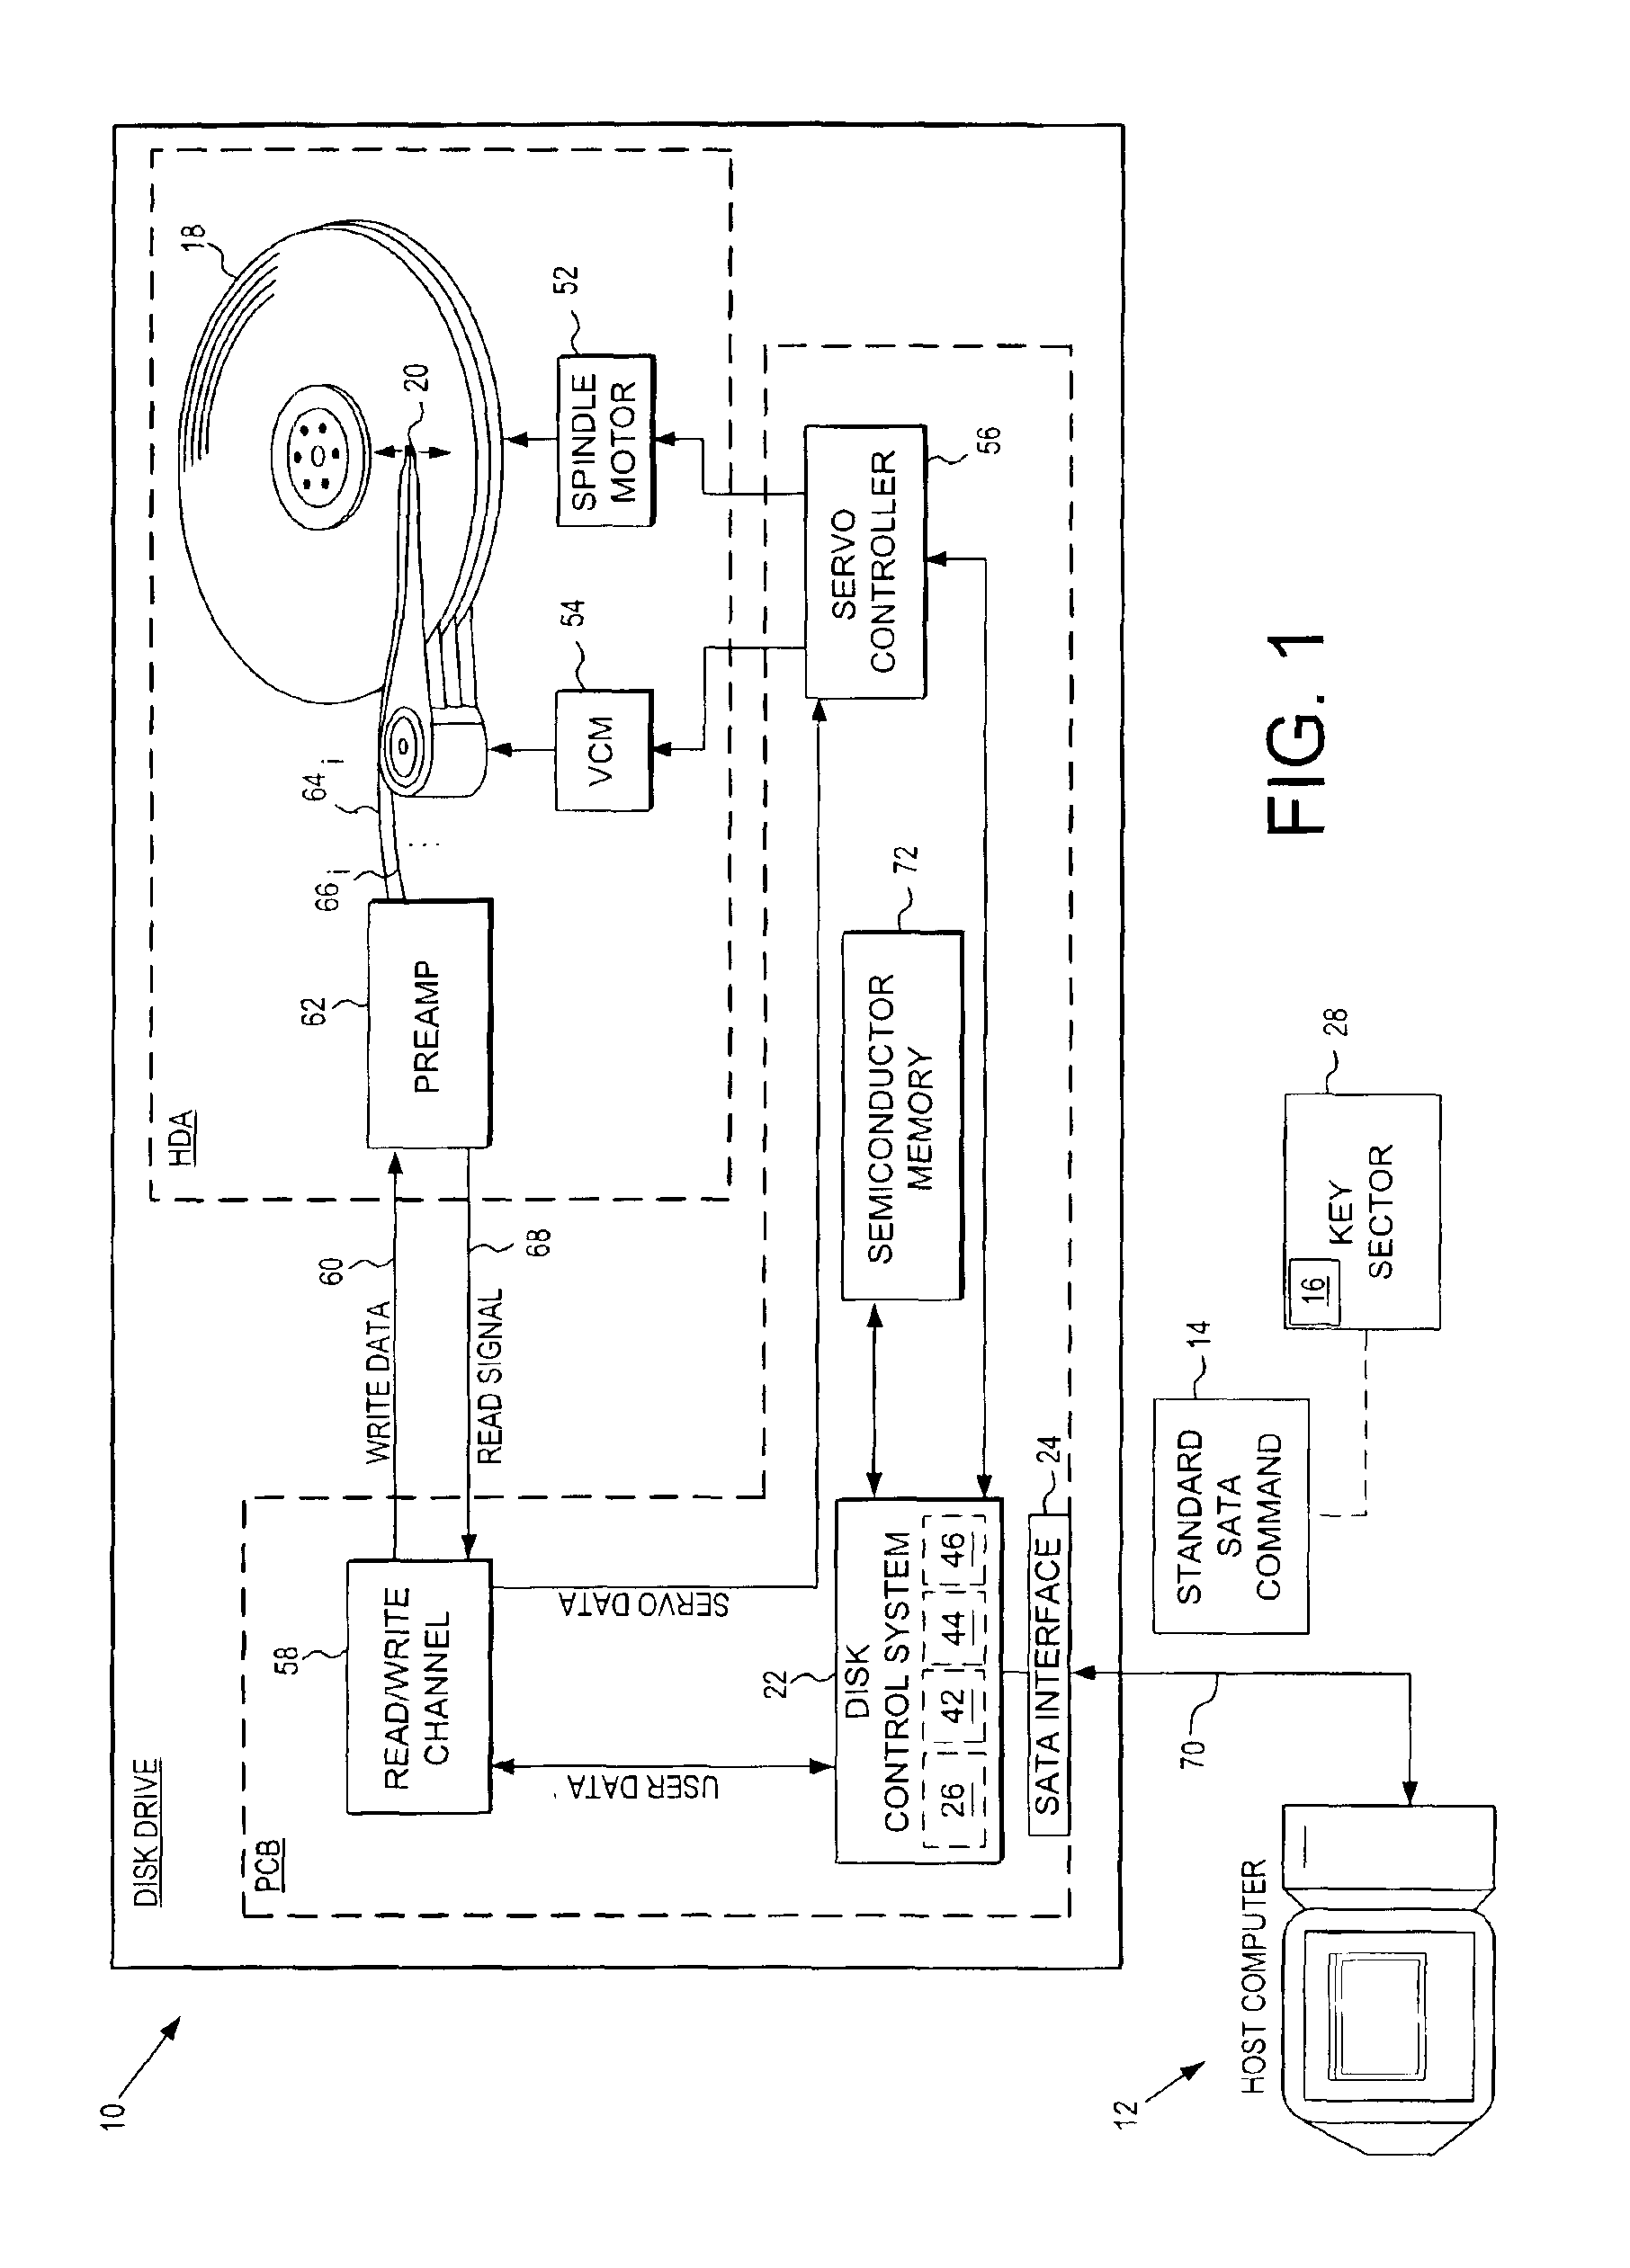 Disk drive and method for implementing nonstandard disk-drive commands on a serial ATA interface that only supports standard ATA disk-drive commands